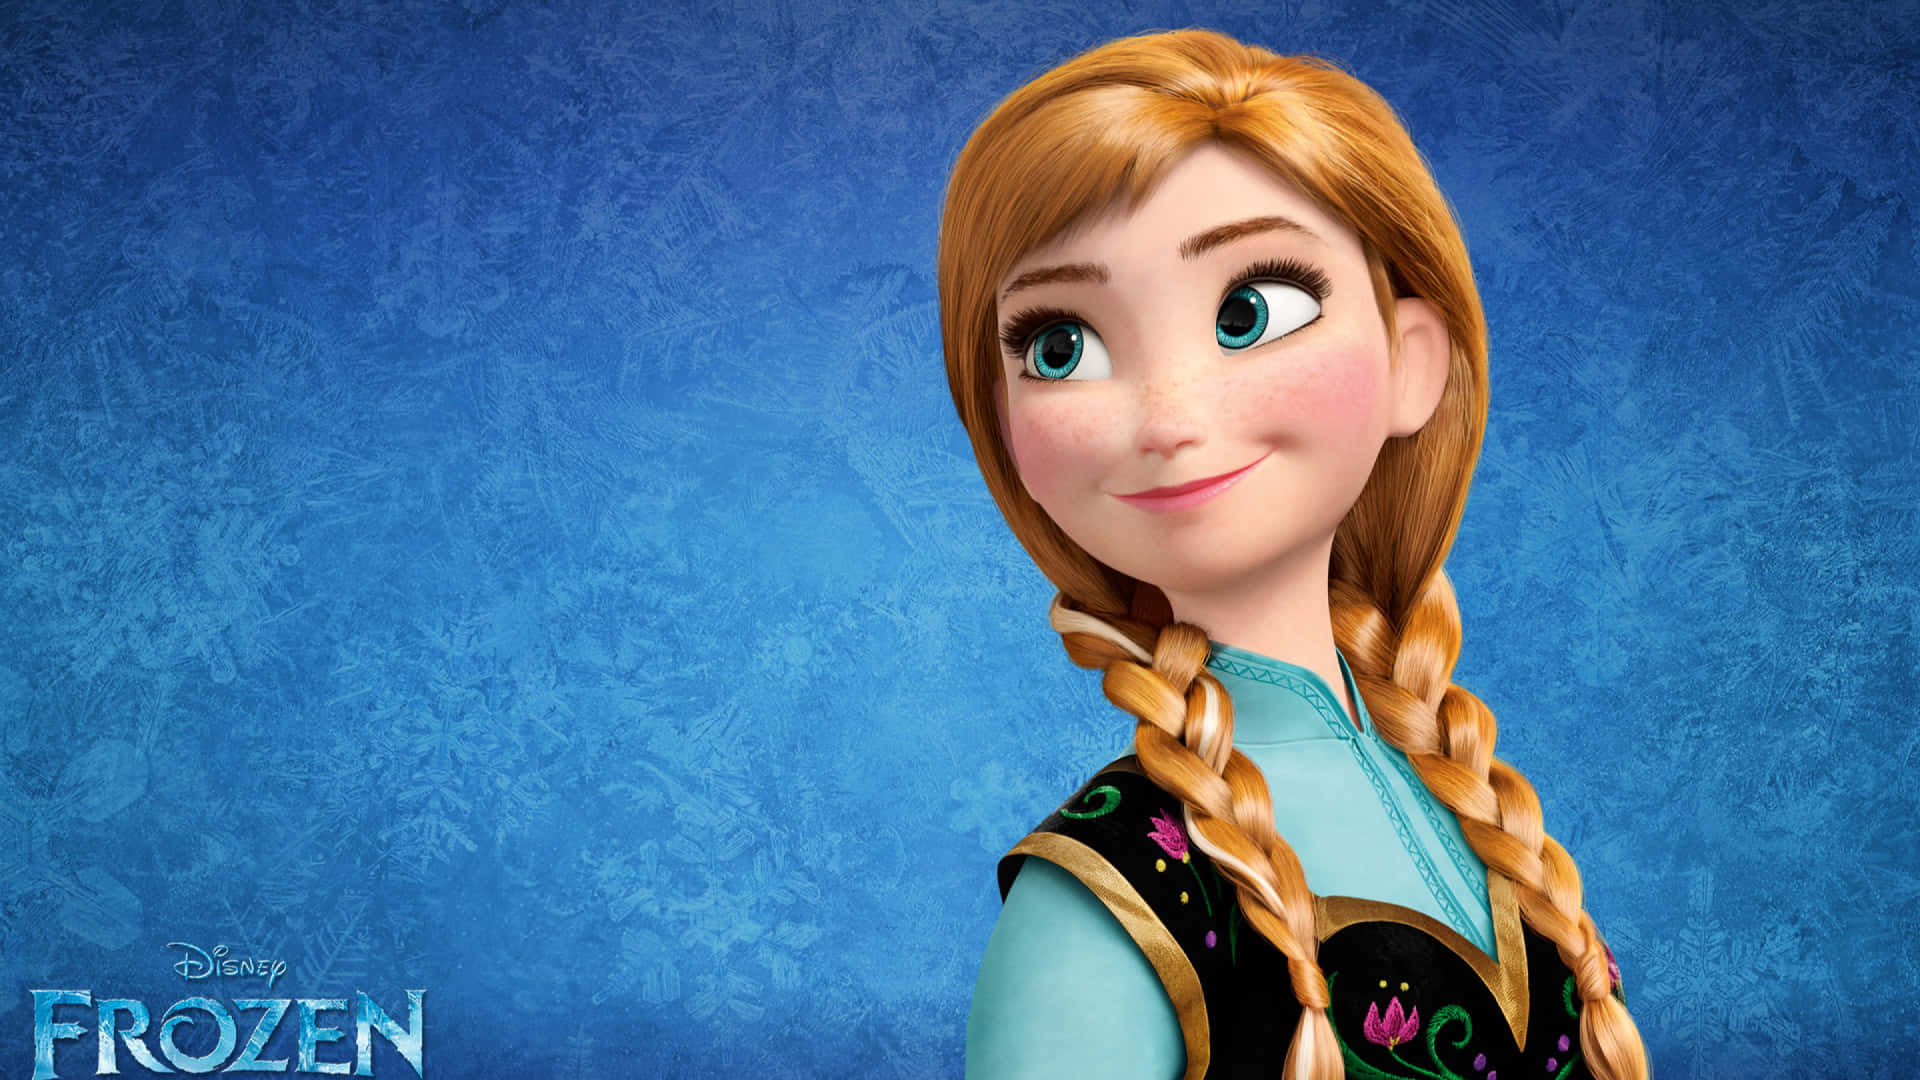 "Dive into the world of Frozen and play with Anna and Elsa!"